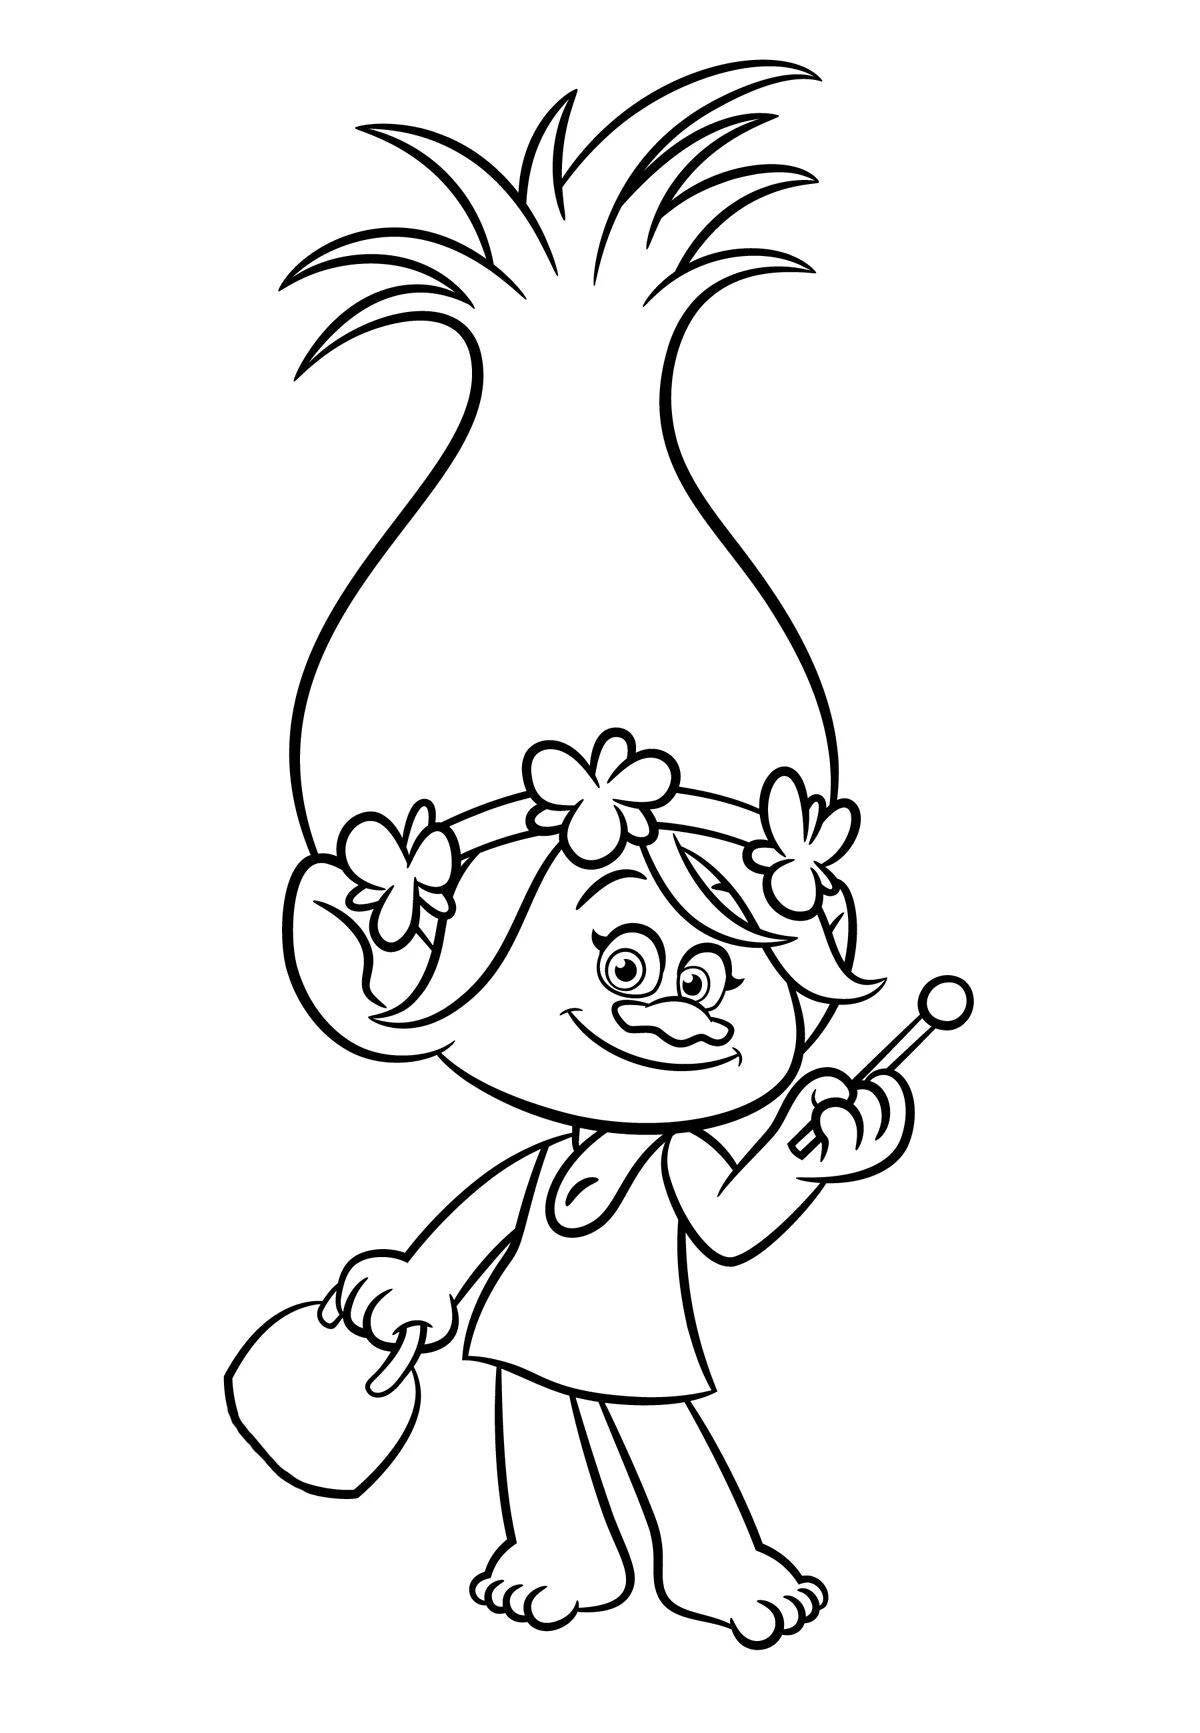 Cute trolls coloring pages for kids